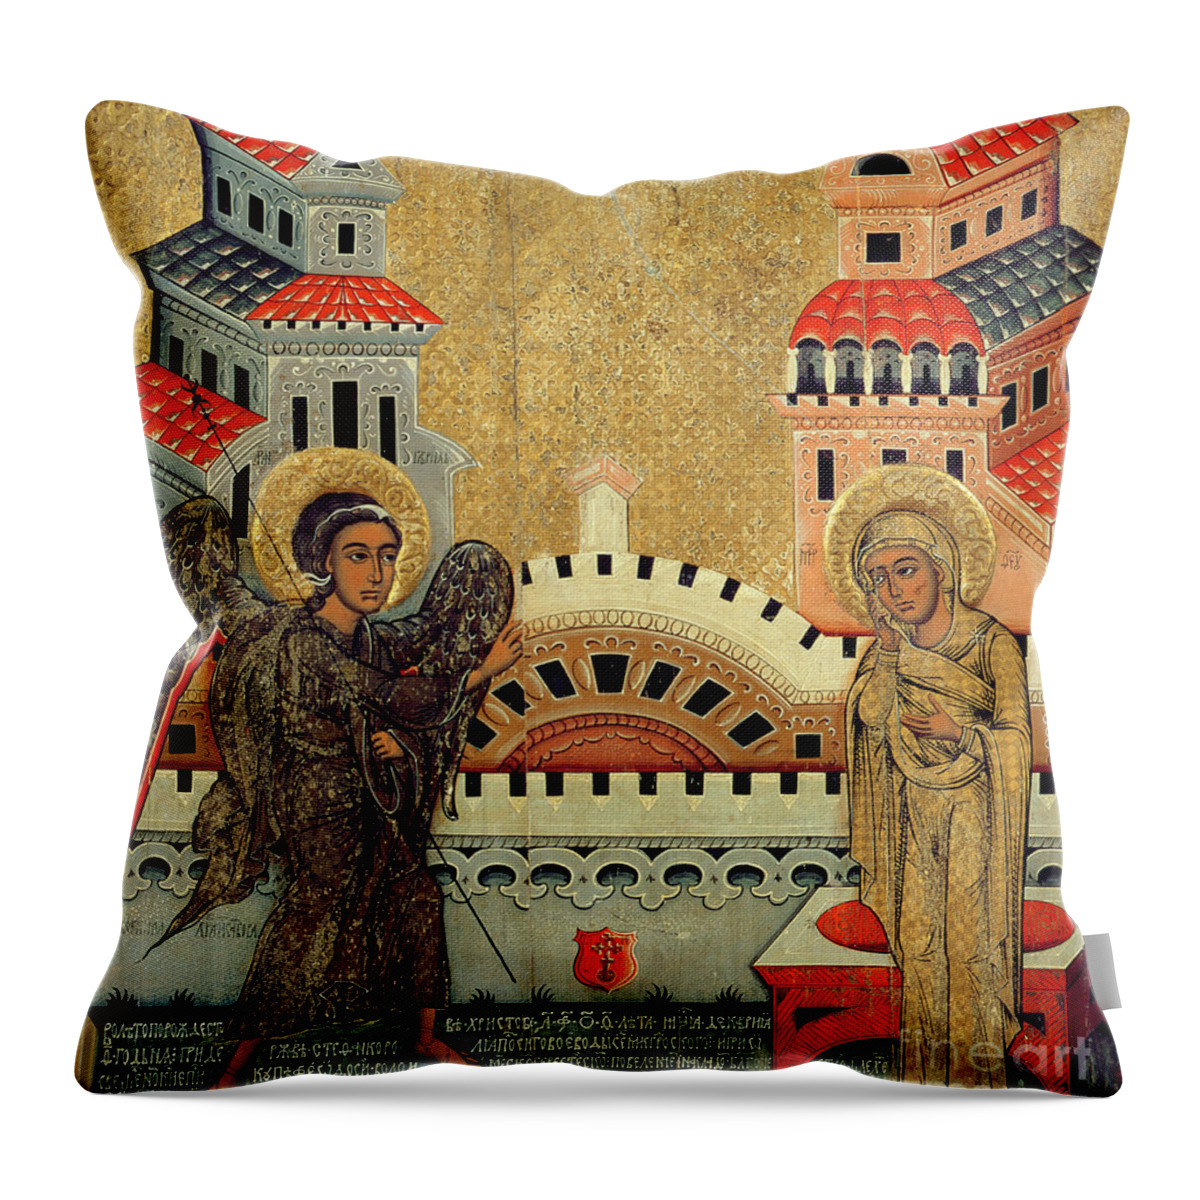 Virgin Mary Throw Pillow featuring the painting The Annunciation by Fedusko of Sambor